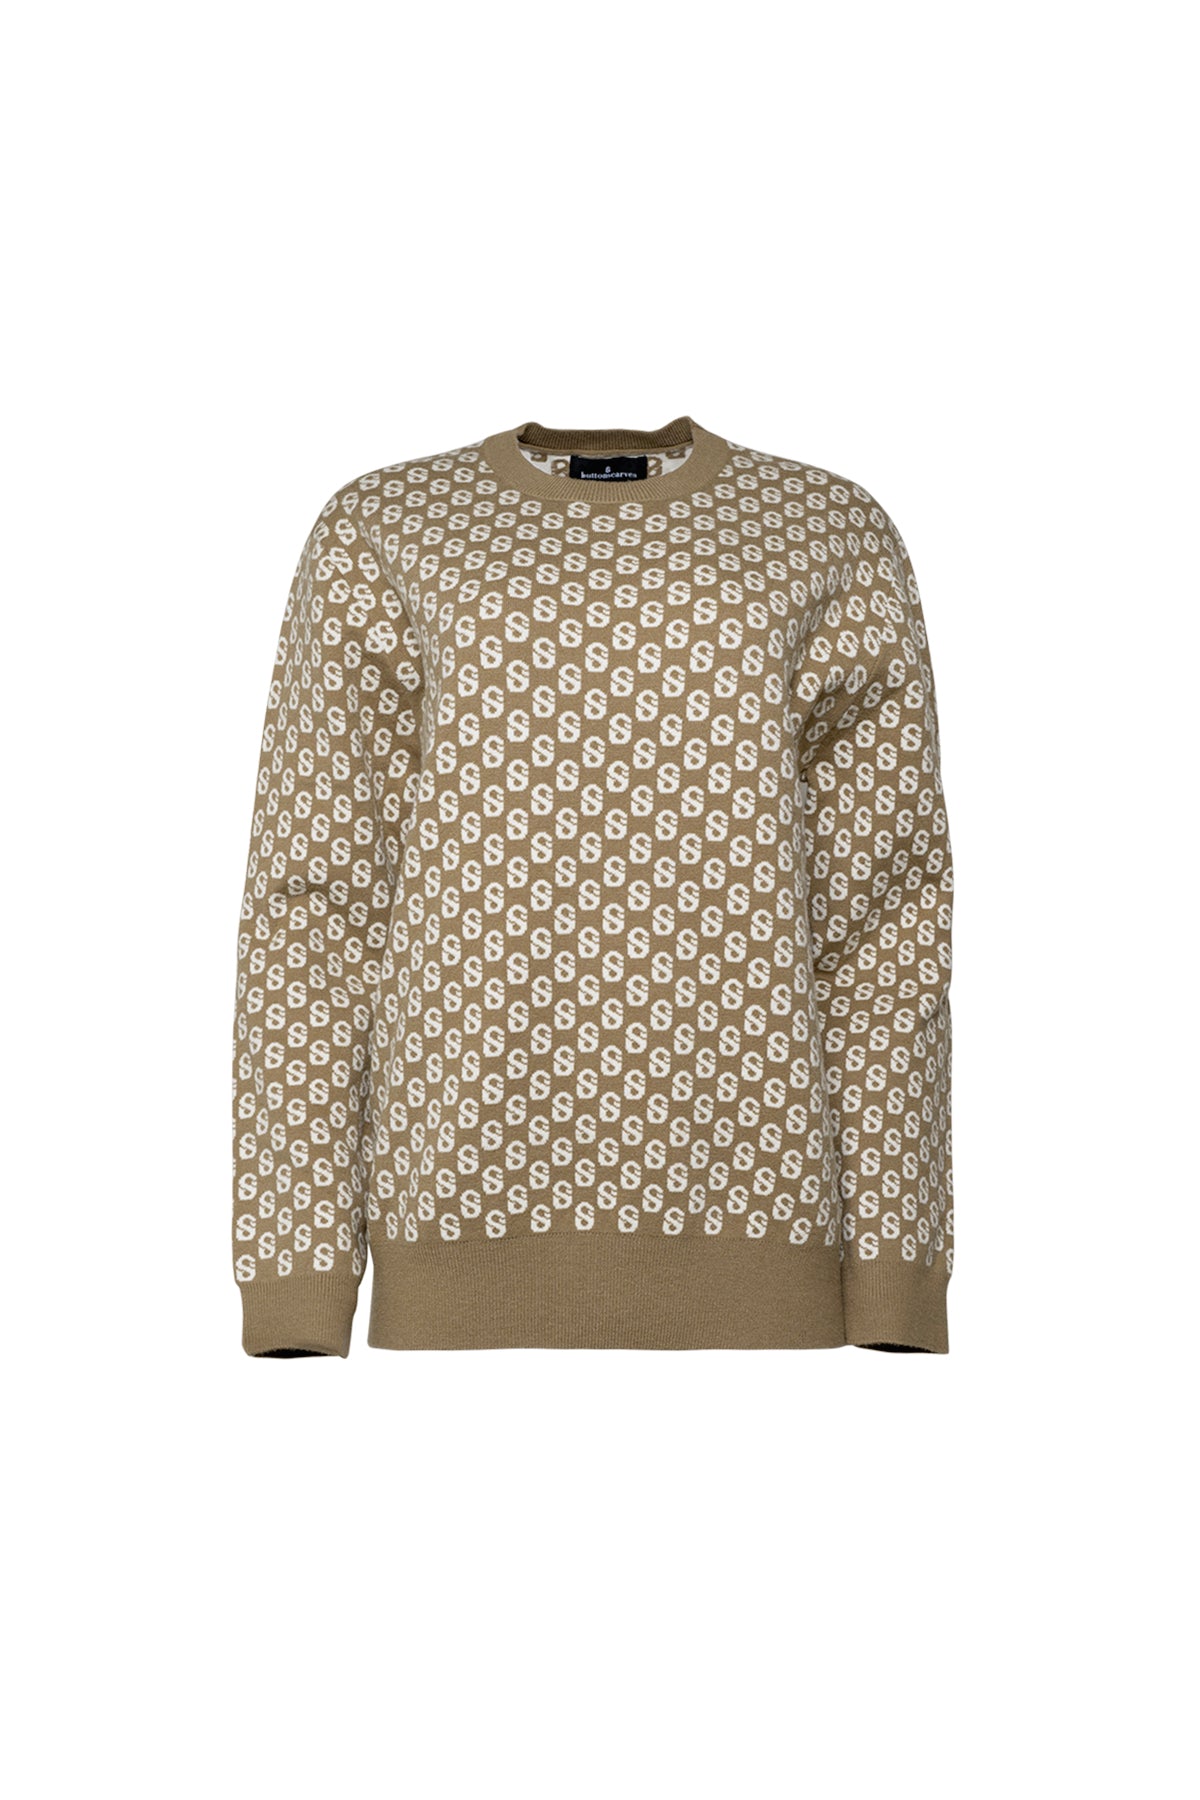 Signature Monogram Sweater is made with a blend of cotton that